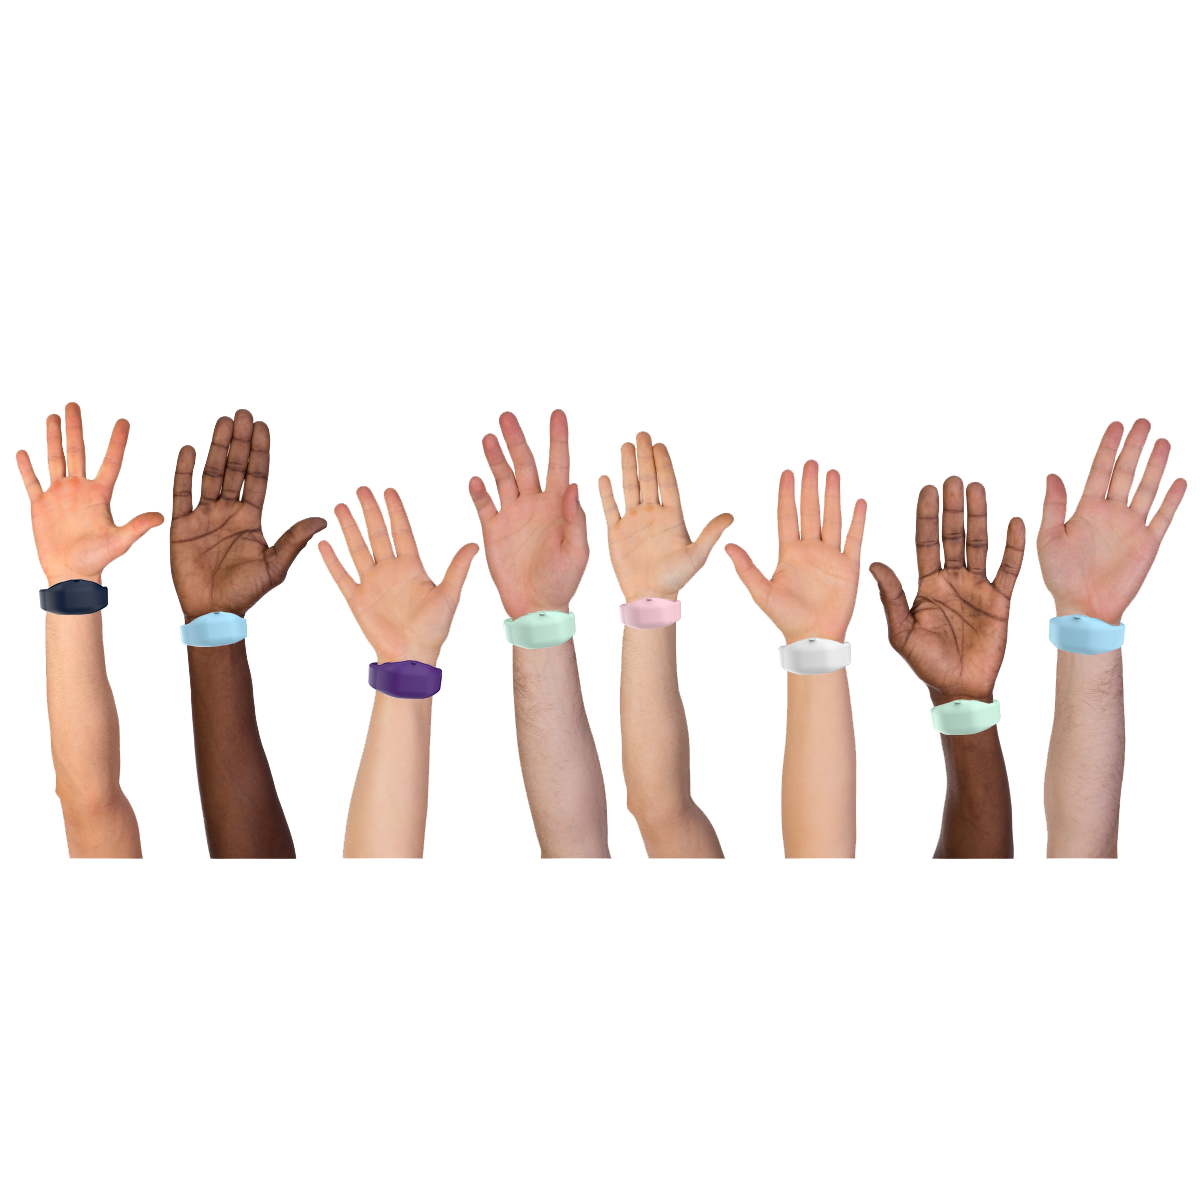 Squeezy Band – Hand Sanitizer Dispensing Band | MINT Health